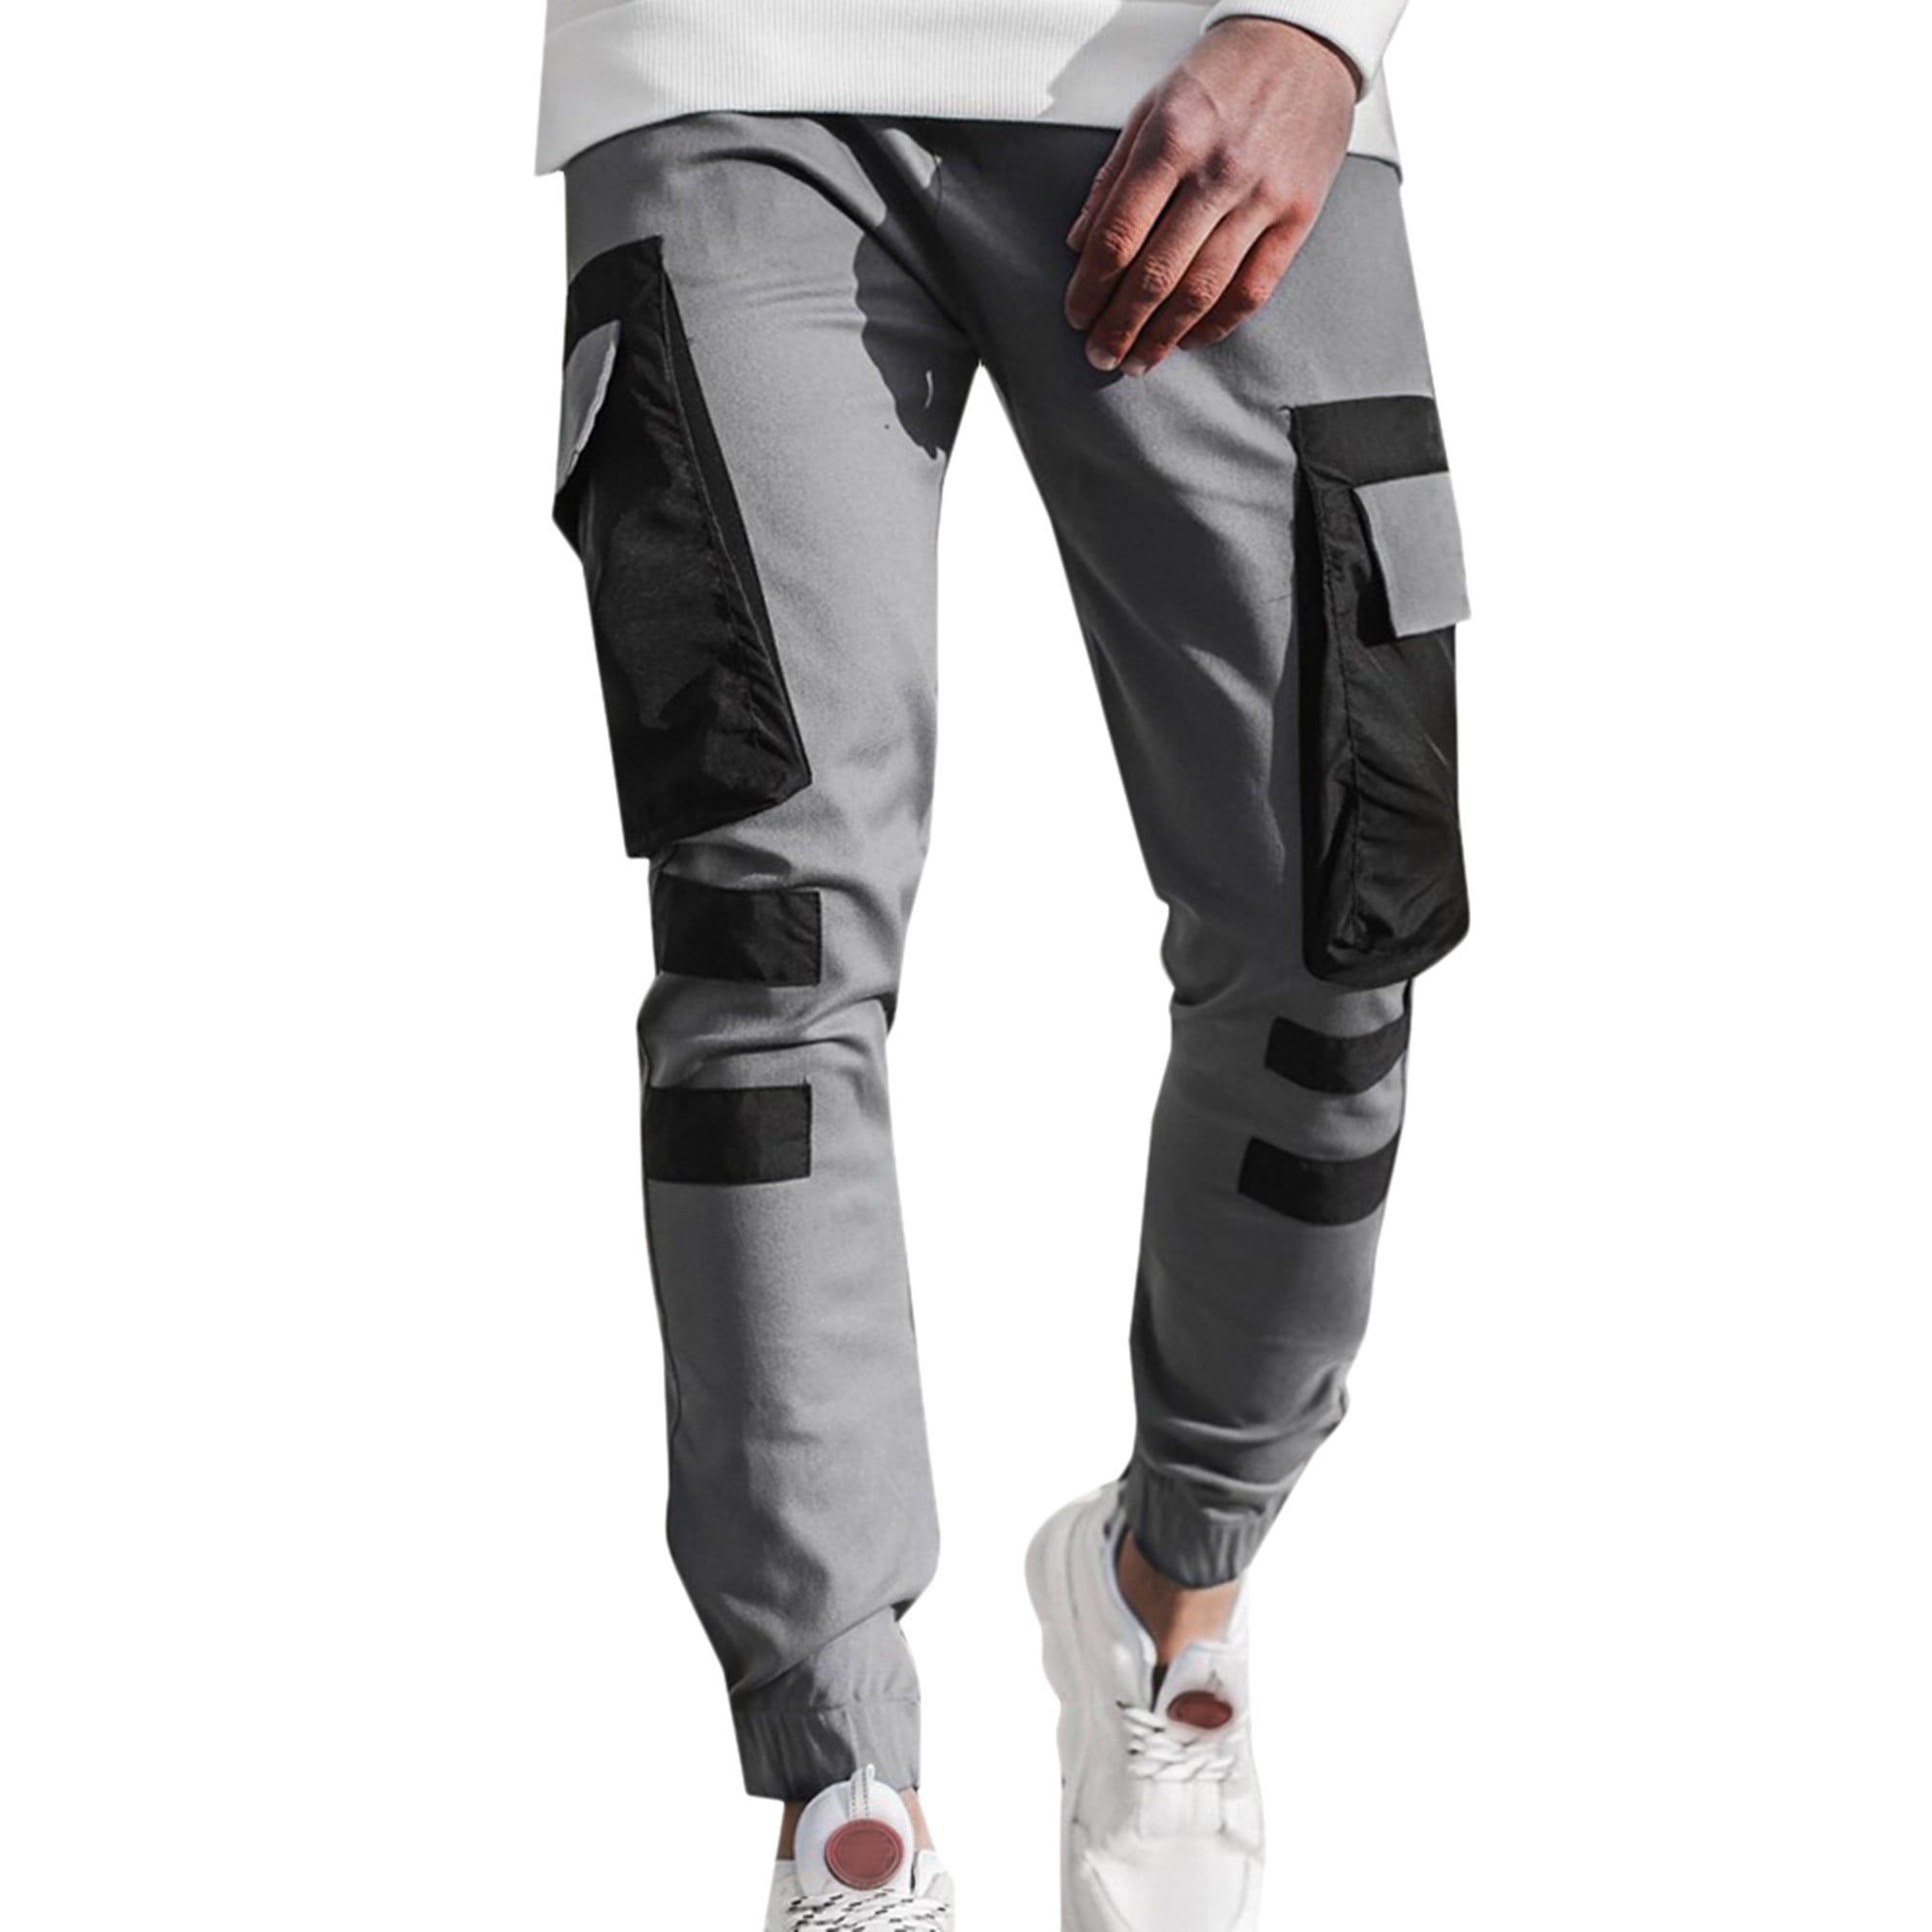 Details about   Mens Casual Workout Gym Running Sweatpants with Towel Loop Multi Pockets Bottoms 